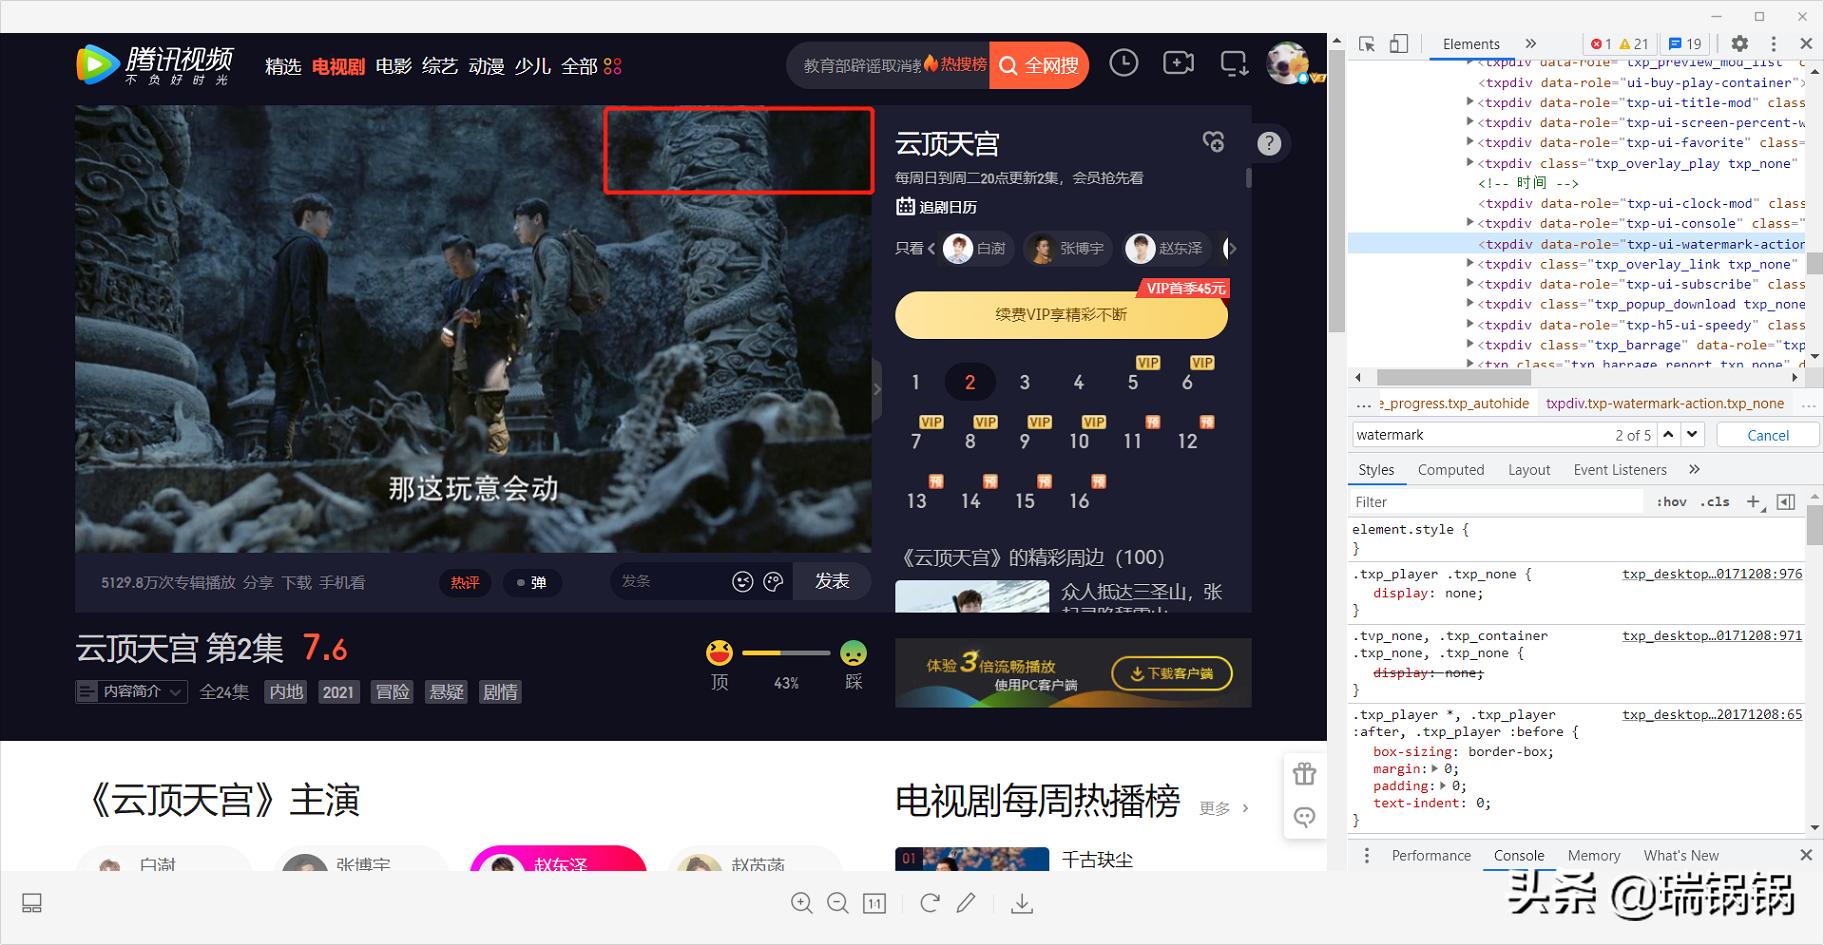 tencent video player